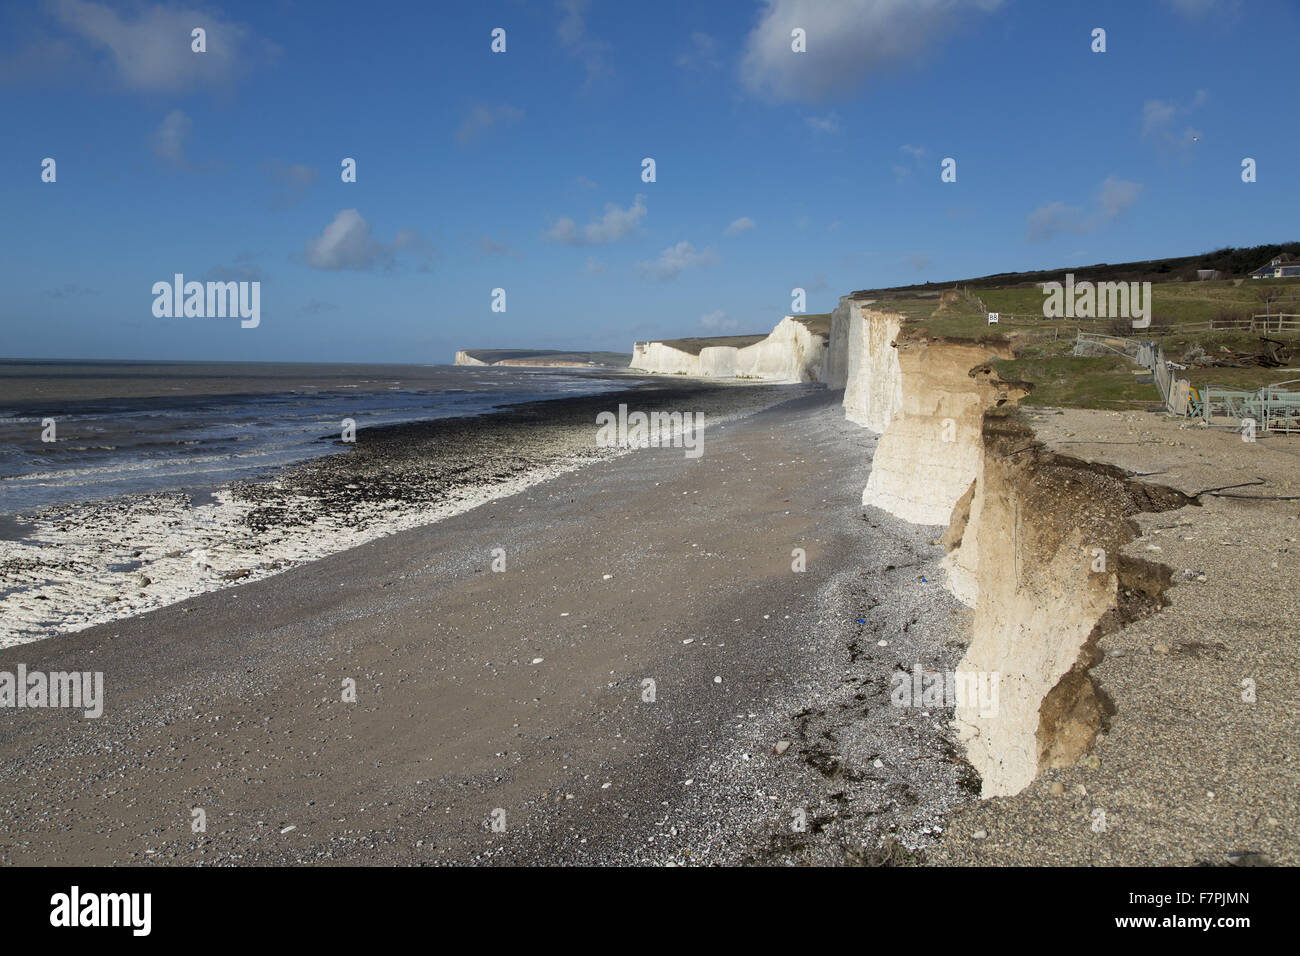 View of the storm-damaged cliffs and beach at Birling Gap, East Sussex, pictured here in February 2014. Extreme weather in January and February of that year resulted in seven years' worth of erosion at Birling Gap in just a few weeks. Stock Photo